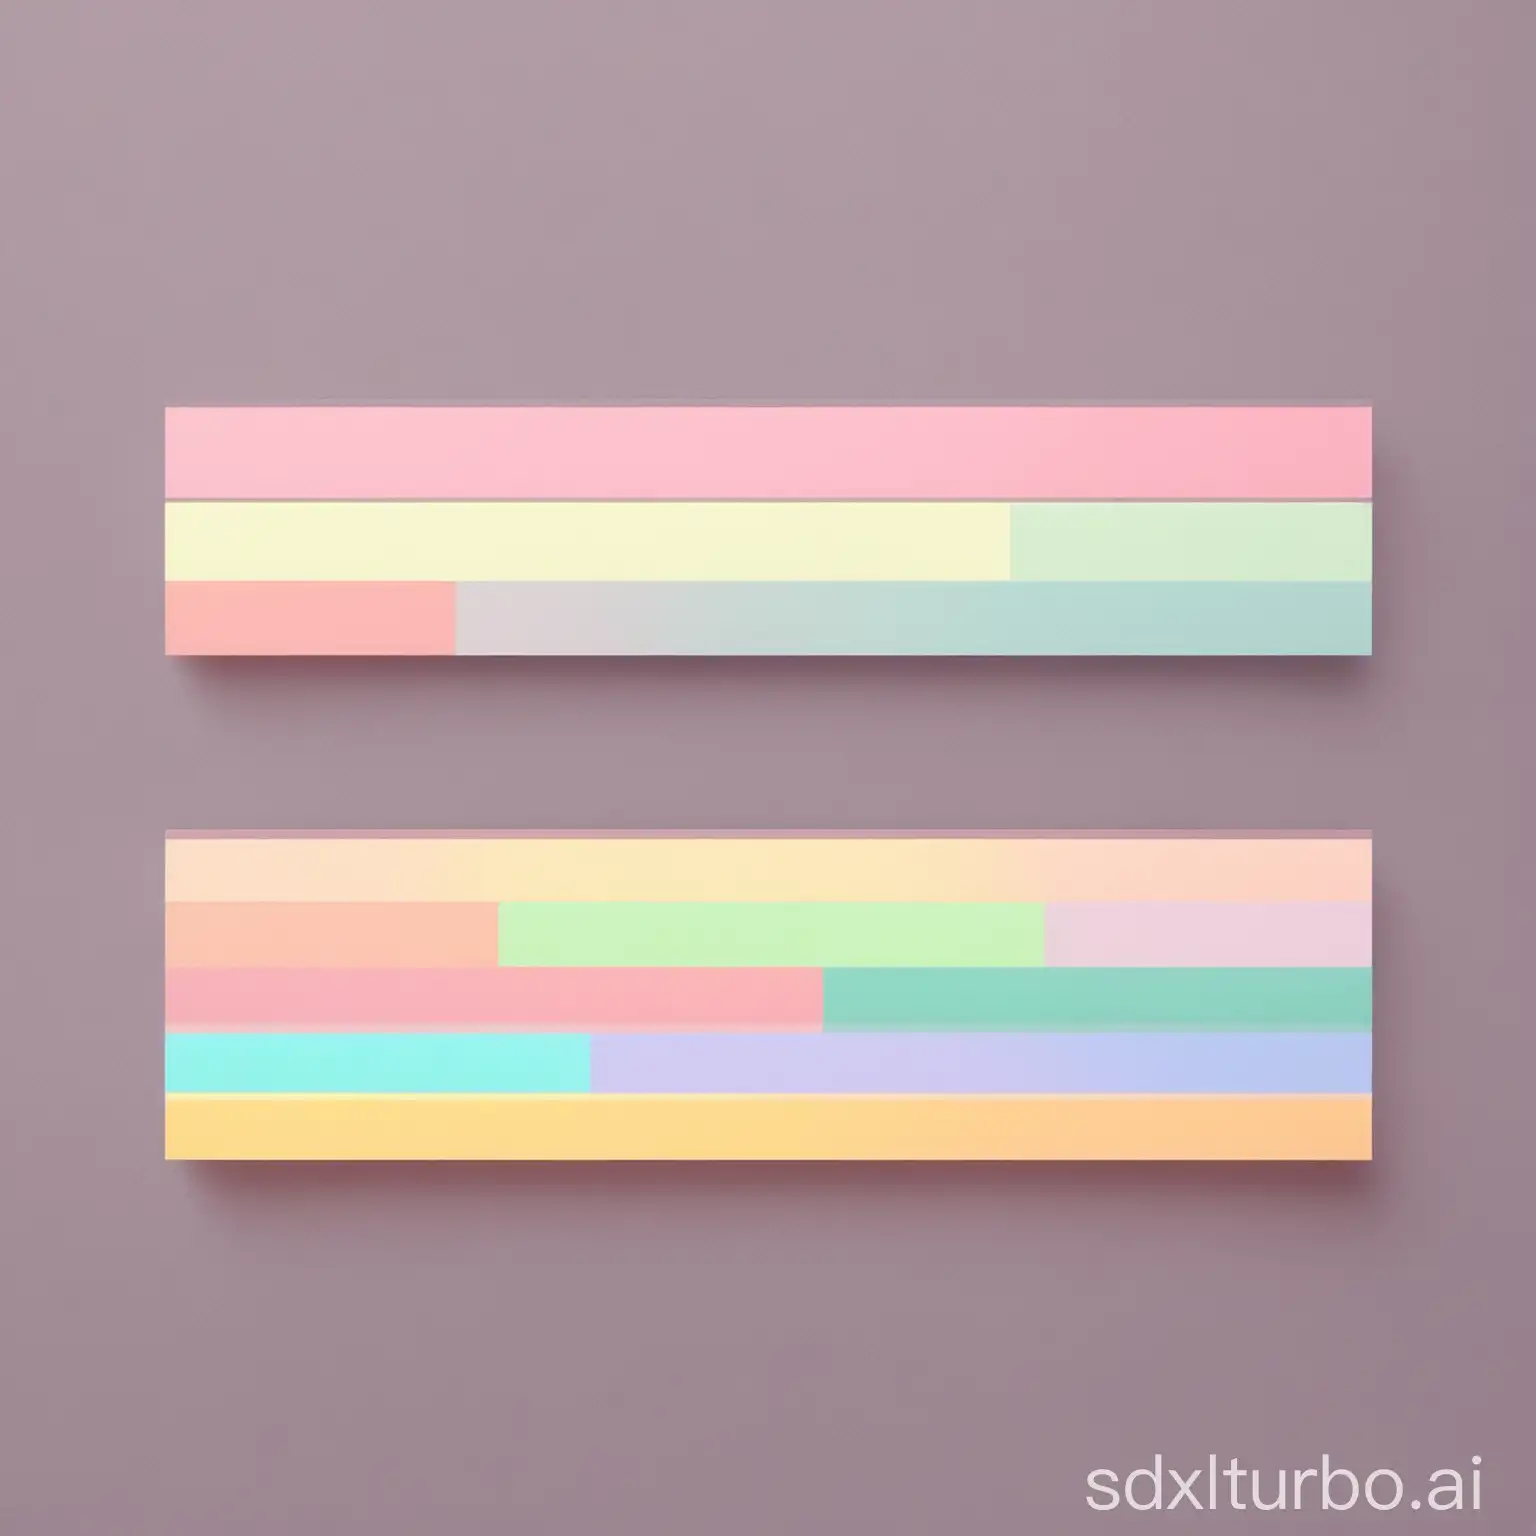 Pixelated-Pastel-Lower-Thirds-Minimalistic-and-Modern-Design